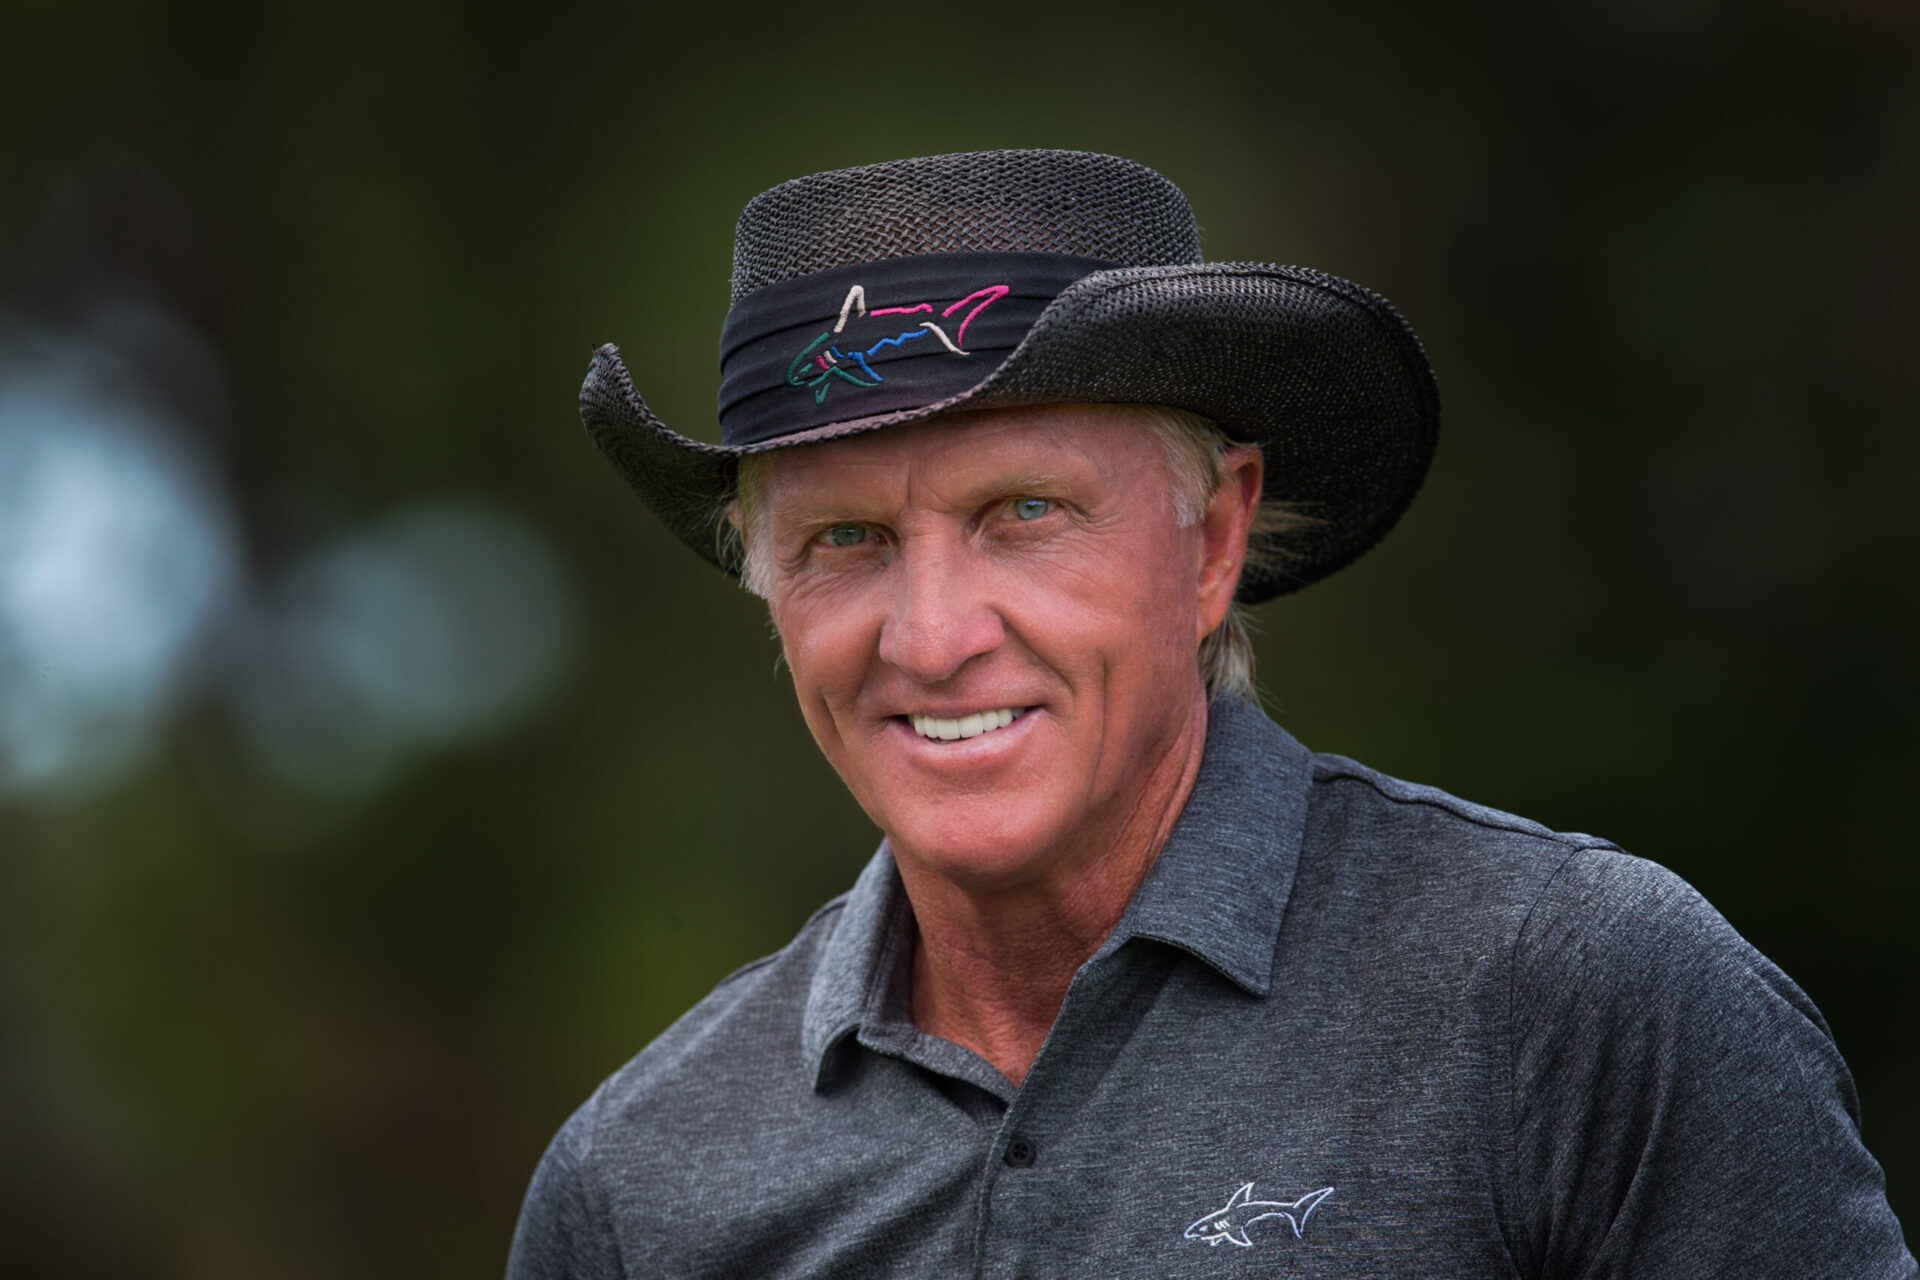 Greg Norman Biography: Age, Wife, Children, Net Worth, Height, Clothes, Beaches, Profession